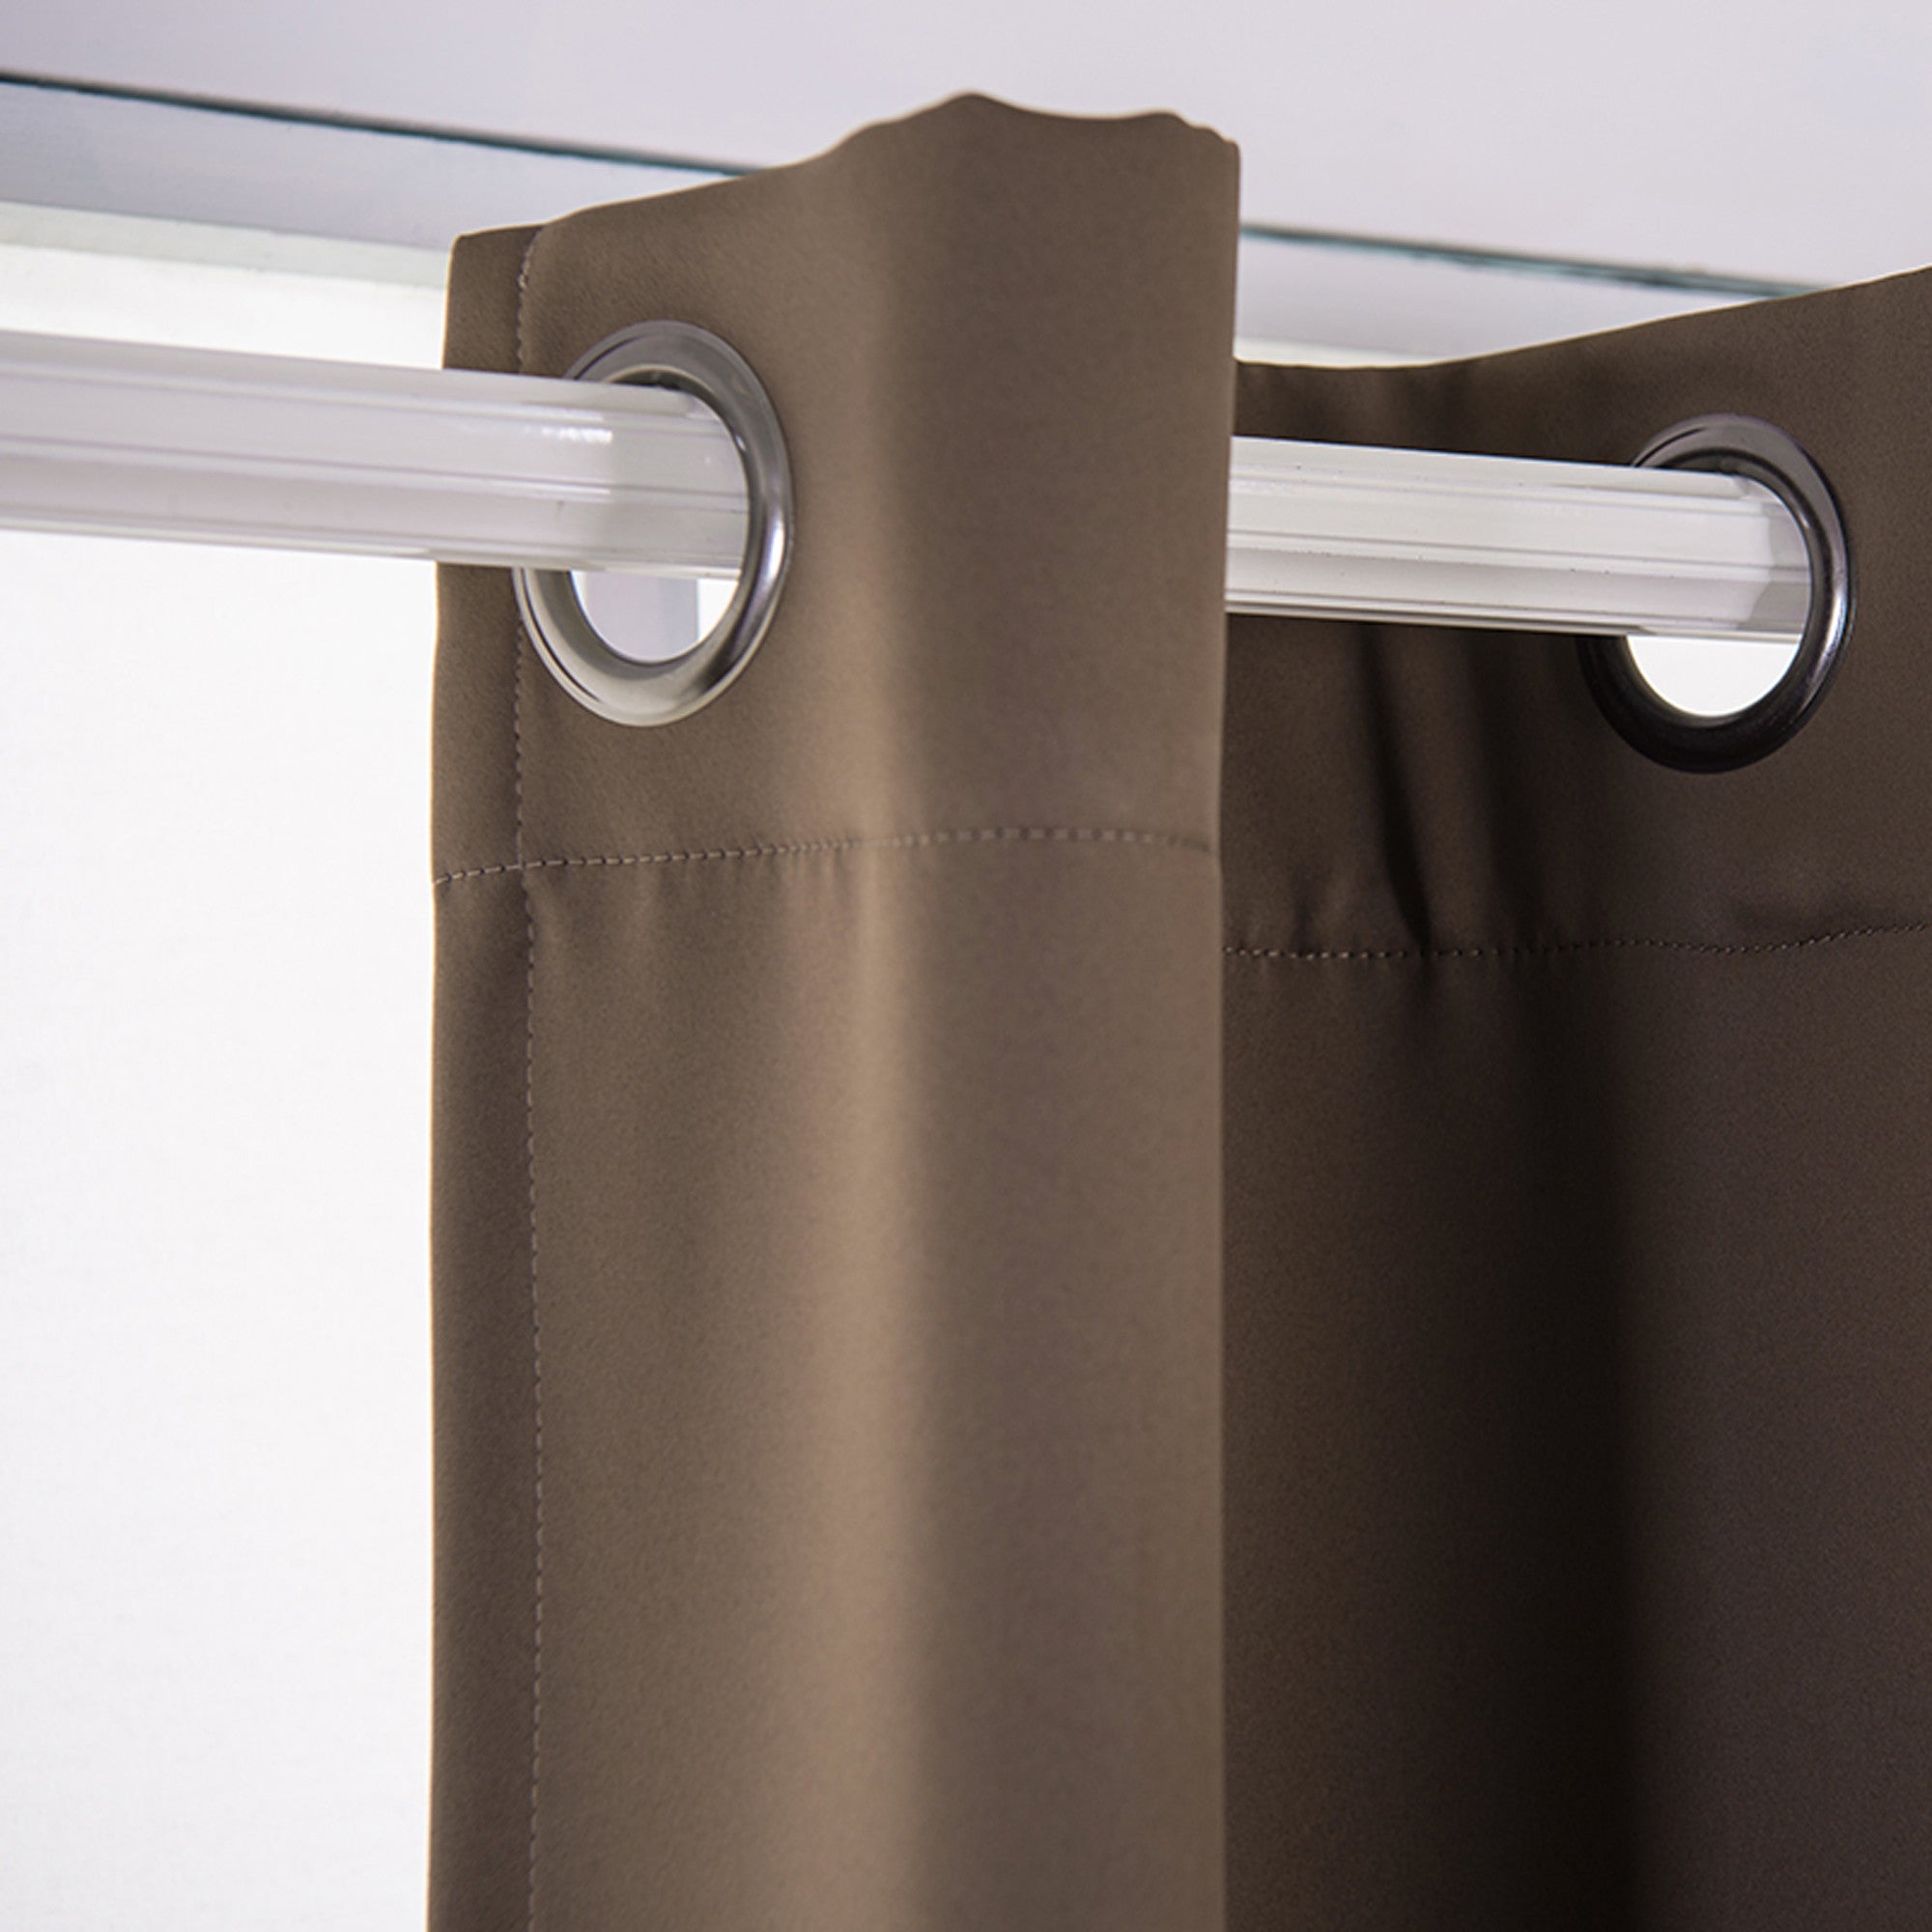 Teamson Home 72" Edessa Premium Solid Insulated Thermal Blackout Window Curtain Panels with Grommets, Hazelnut Brown